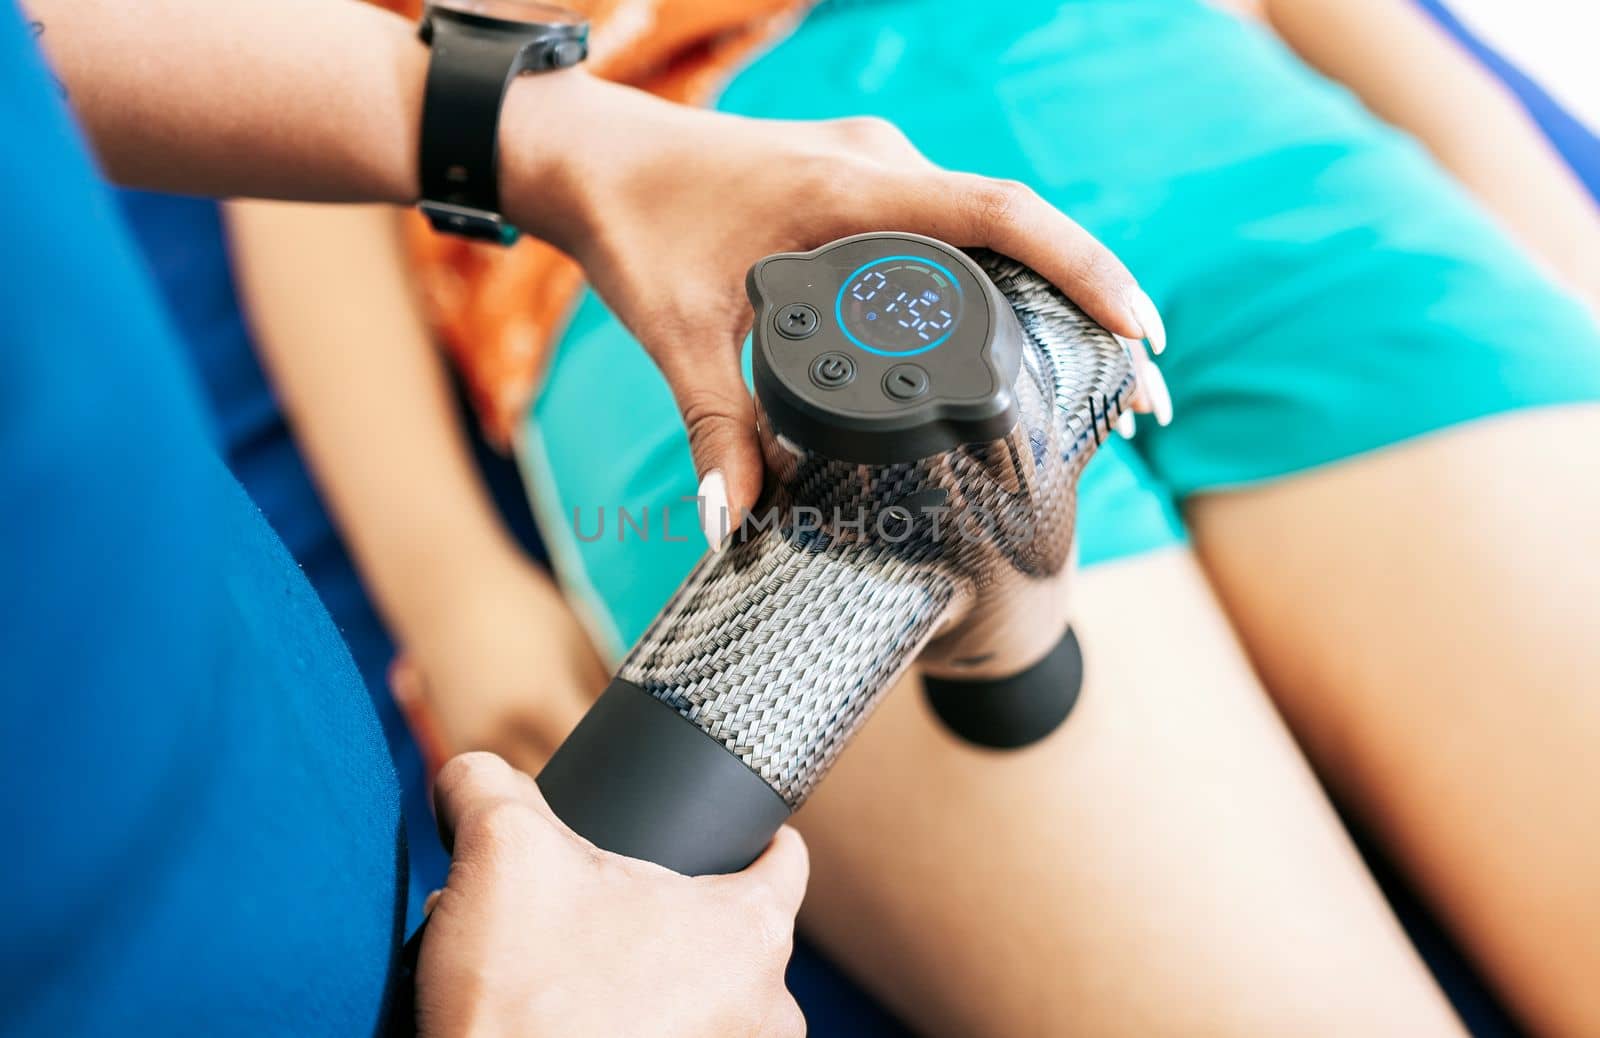 Physiotherapist using massage gun to relieve muscle pain, Percussion or vibration therapy. Physiotherapist using massage gun on patient. Chiropractor using massage gun on patient leg